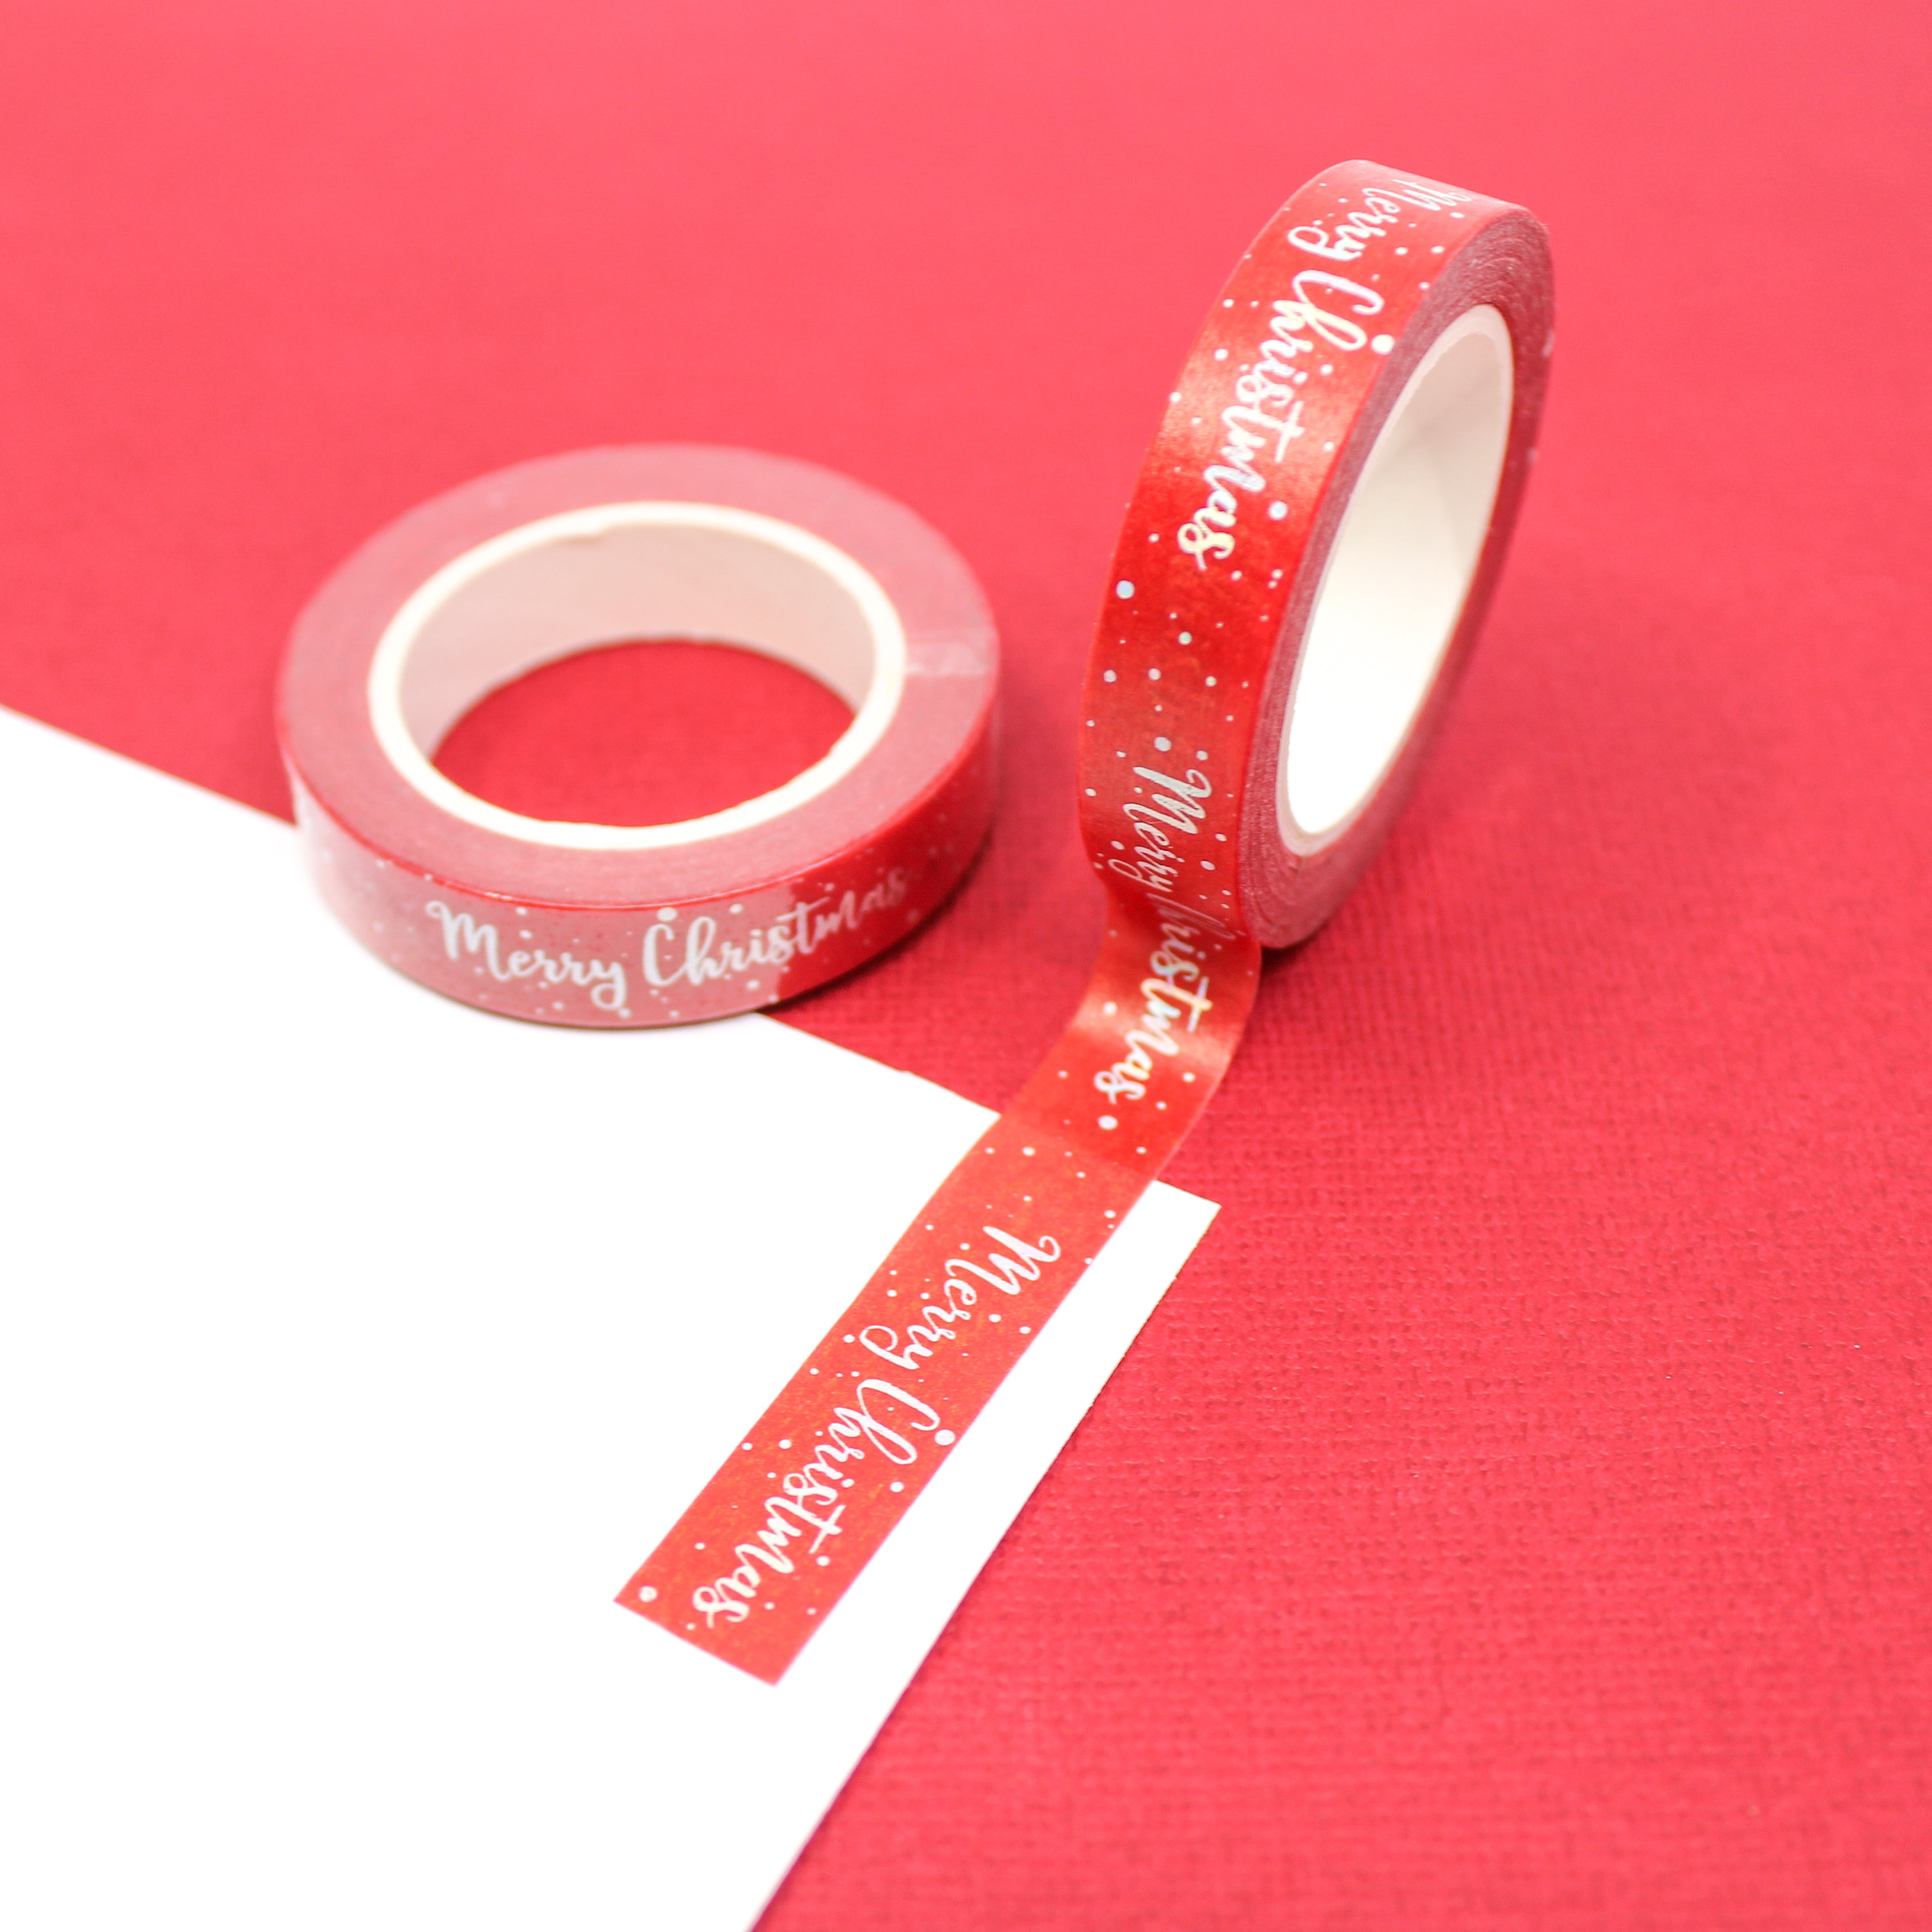 This is a Holiday Merry Christmas greetings in cursive writing washi tape from BBB Supplies Craft Shop